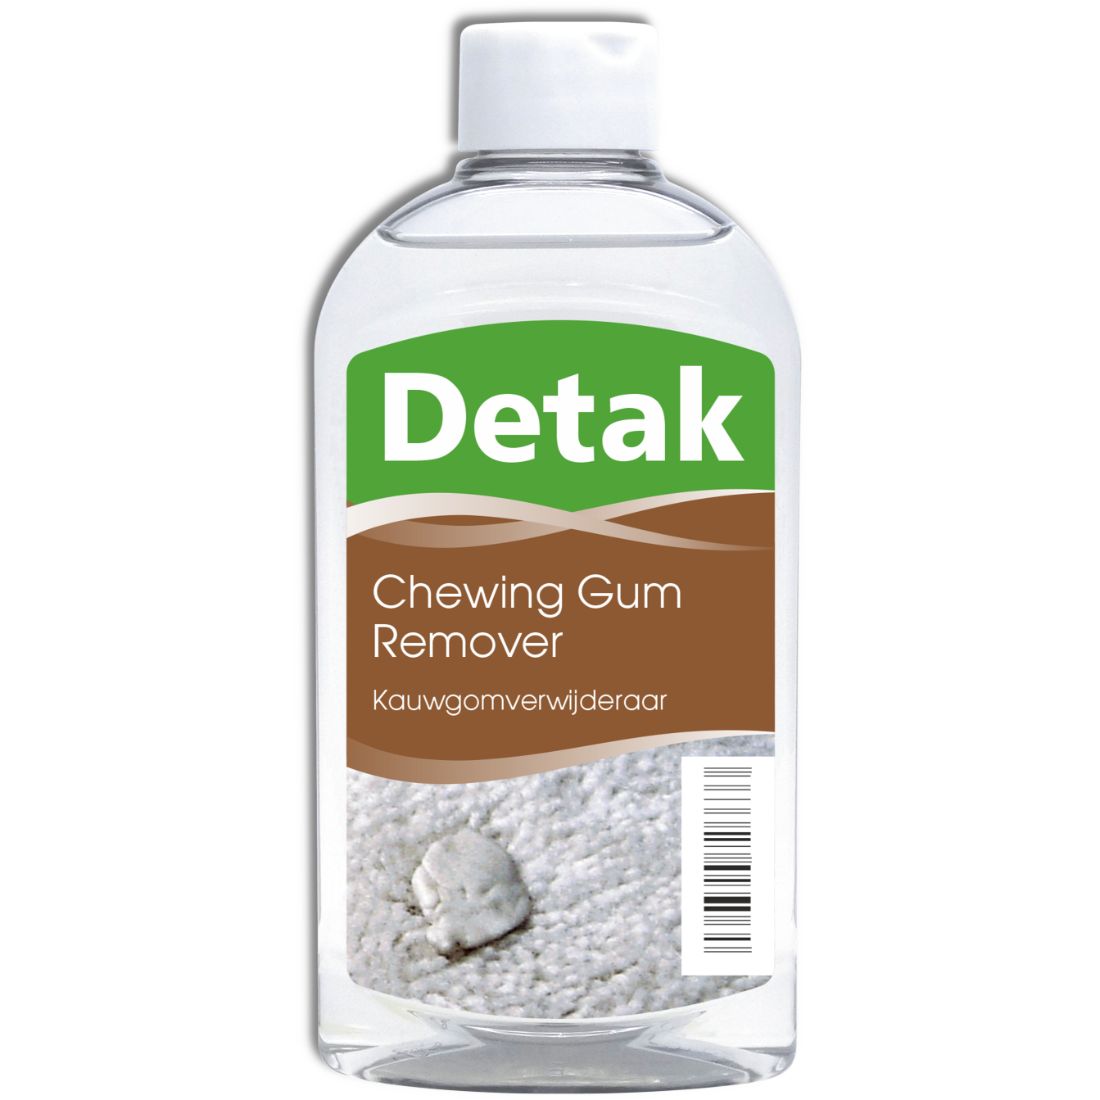 DETAK Solvent Chewing Gum Remover 300ml - Caterclean Supplies